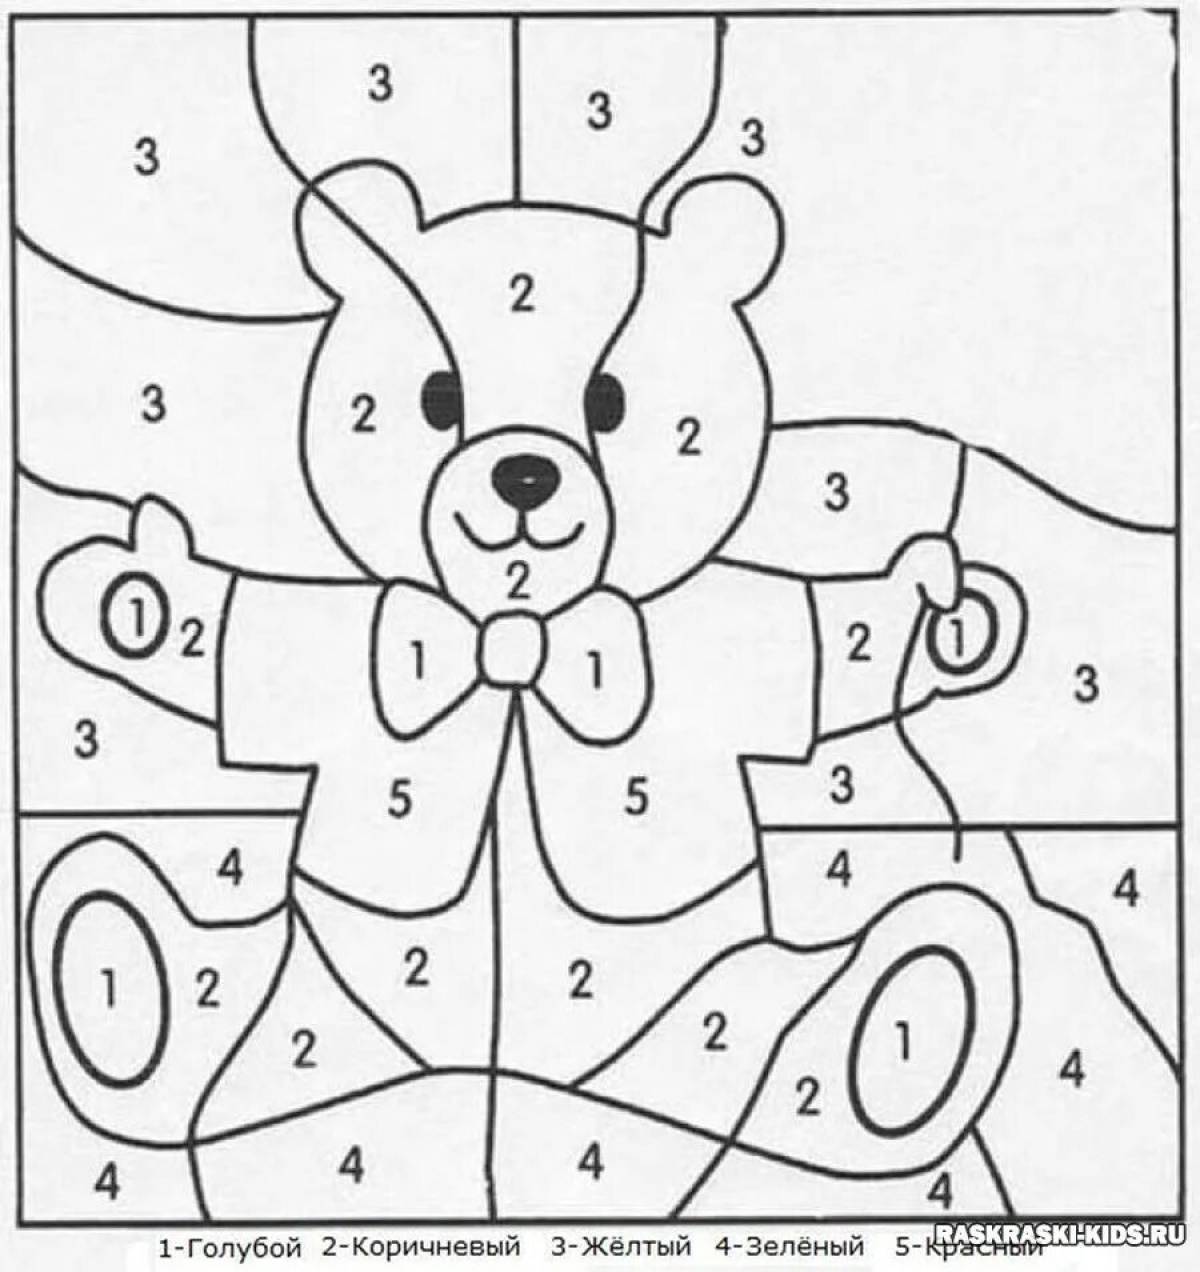 Bear by numbers #3